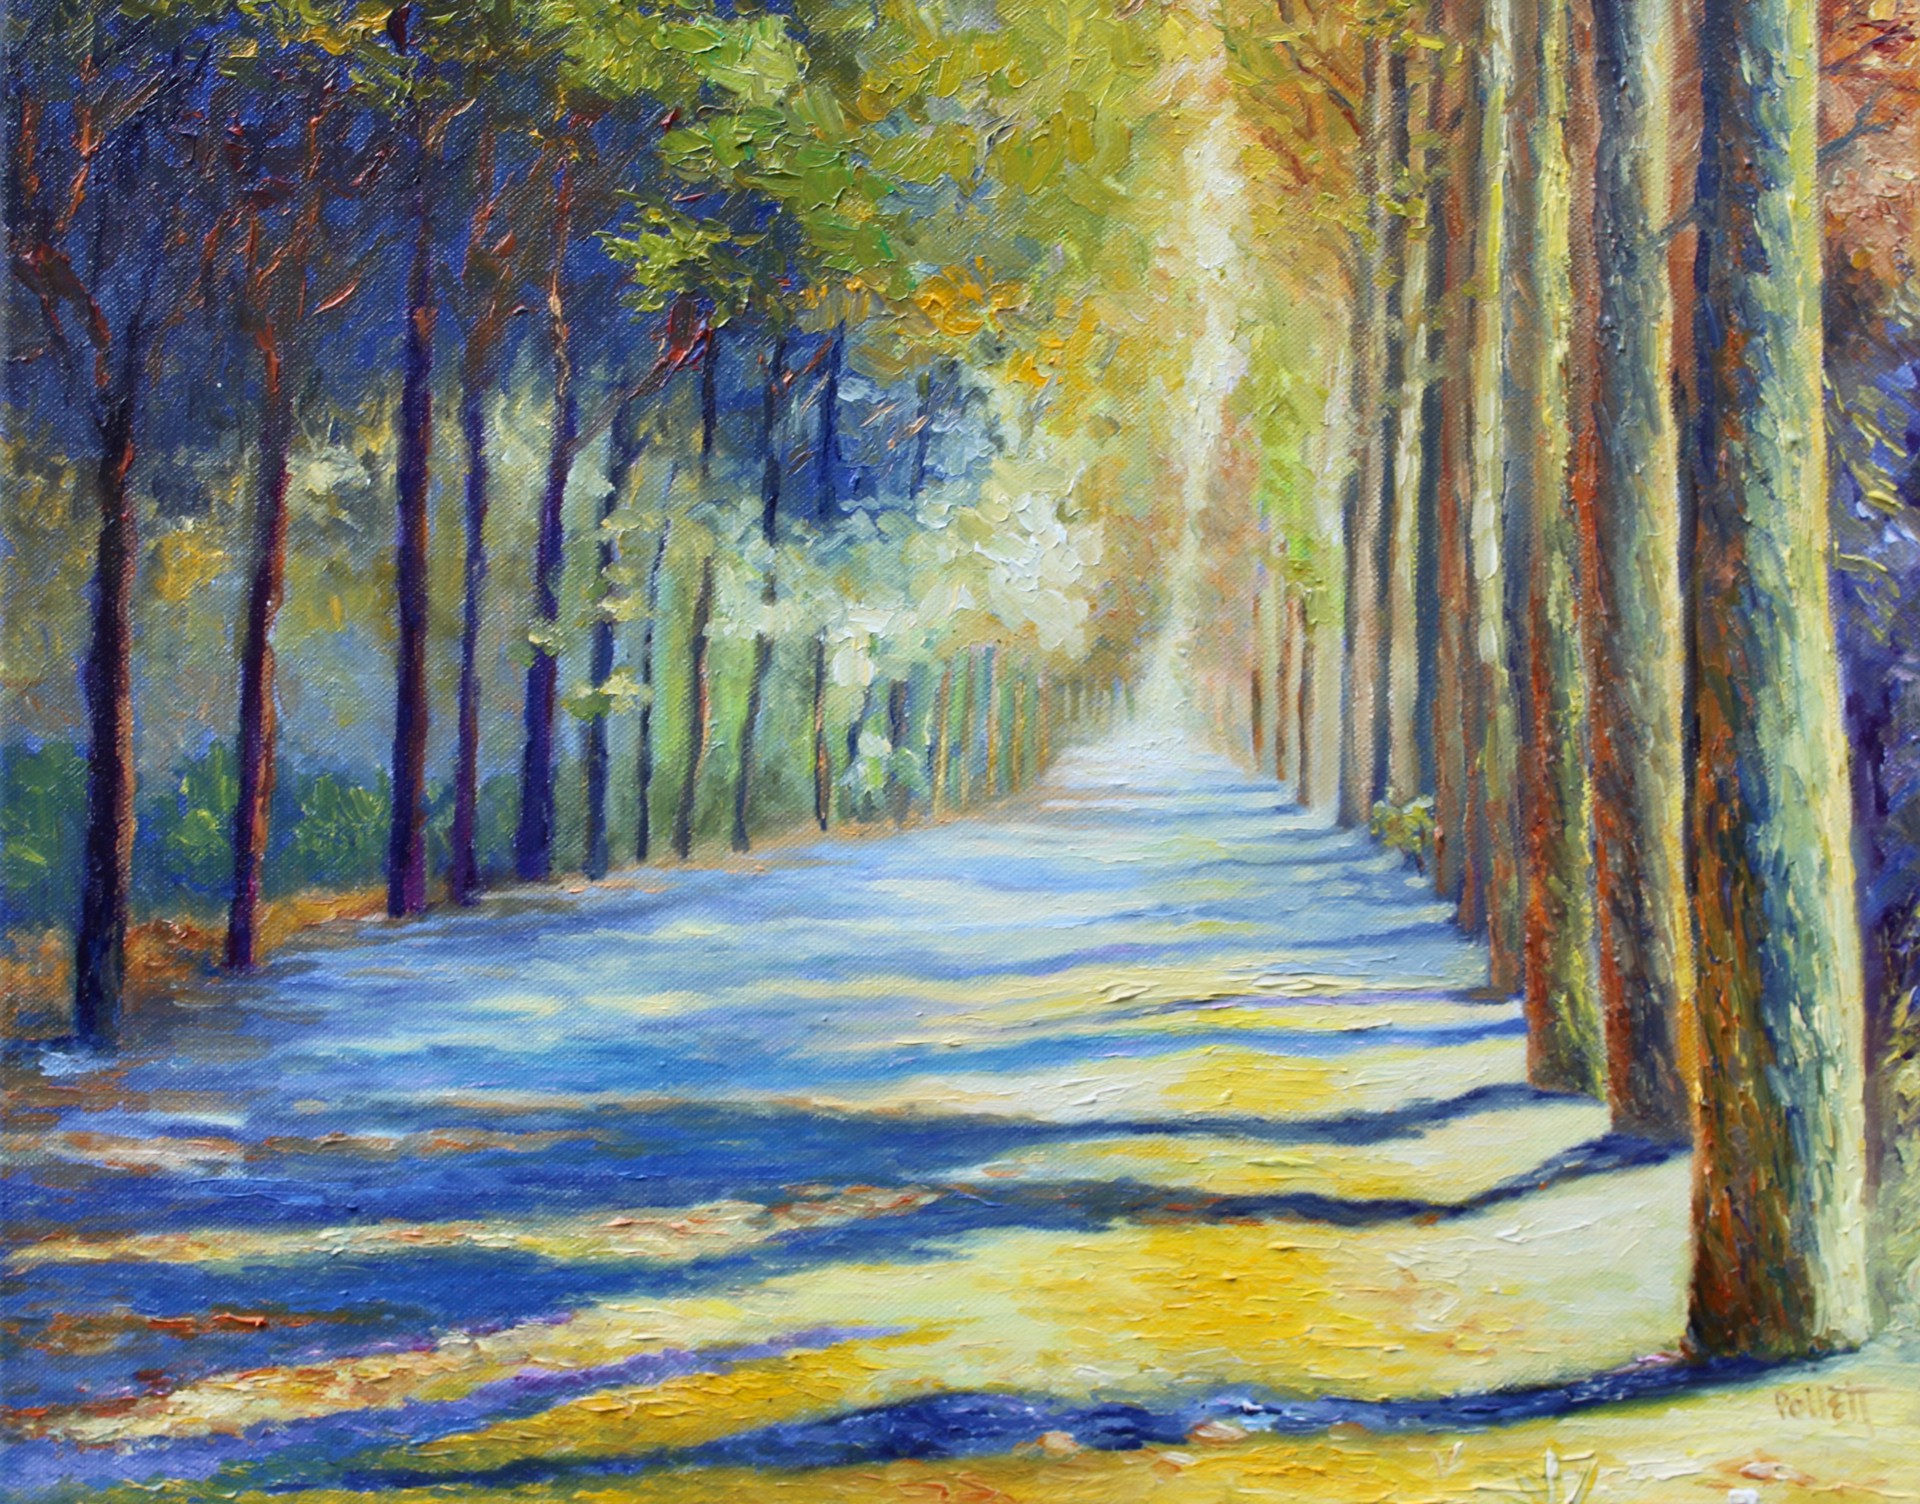 Light on a Straight Path by Cynthia Jewell Pollett